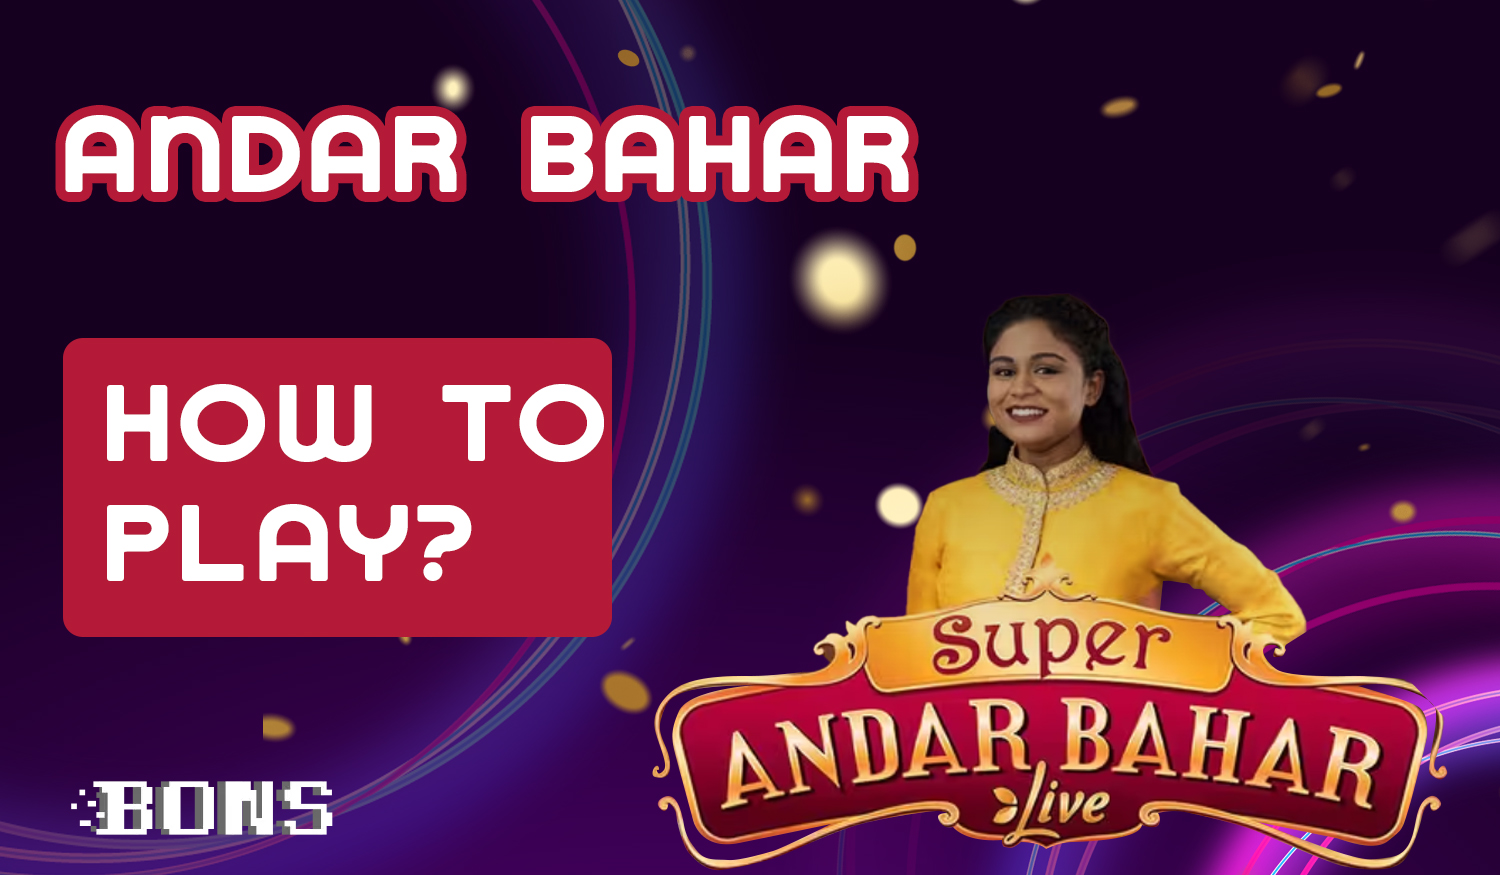 Step-by-step instructions for new users of online casino Bons from India how to start playing Andar Bahar.